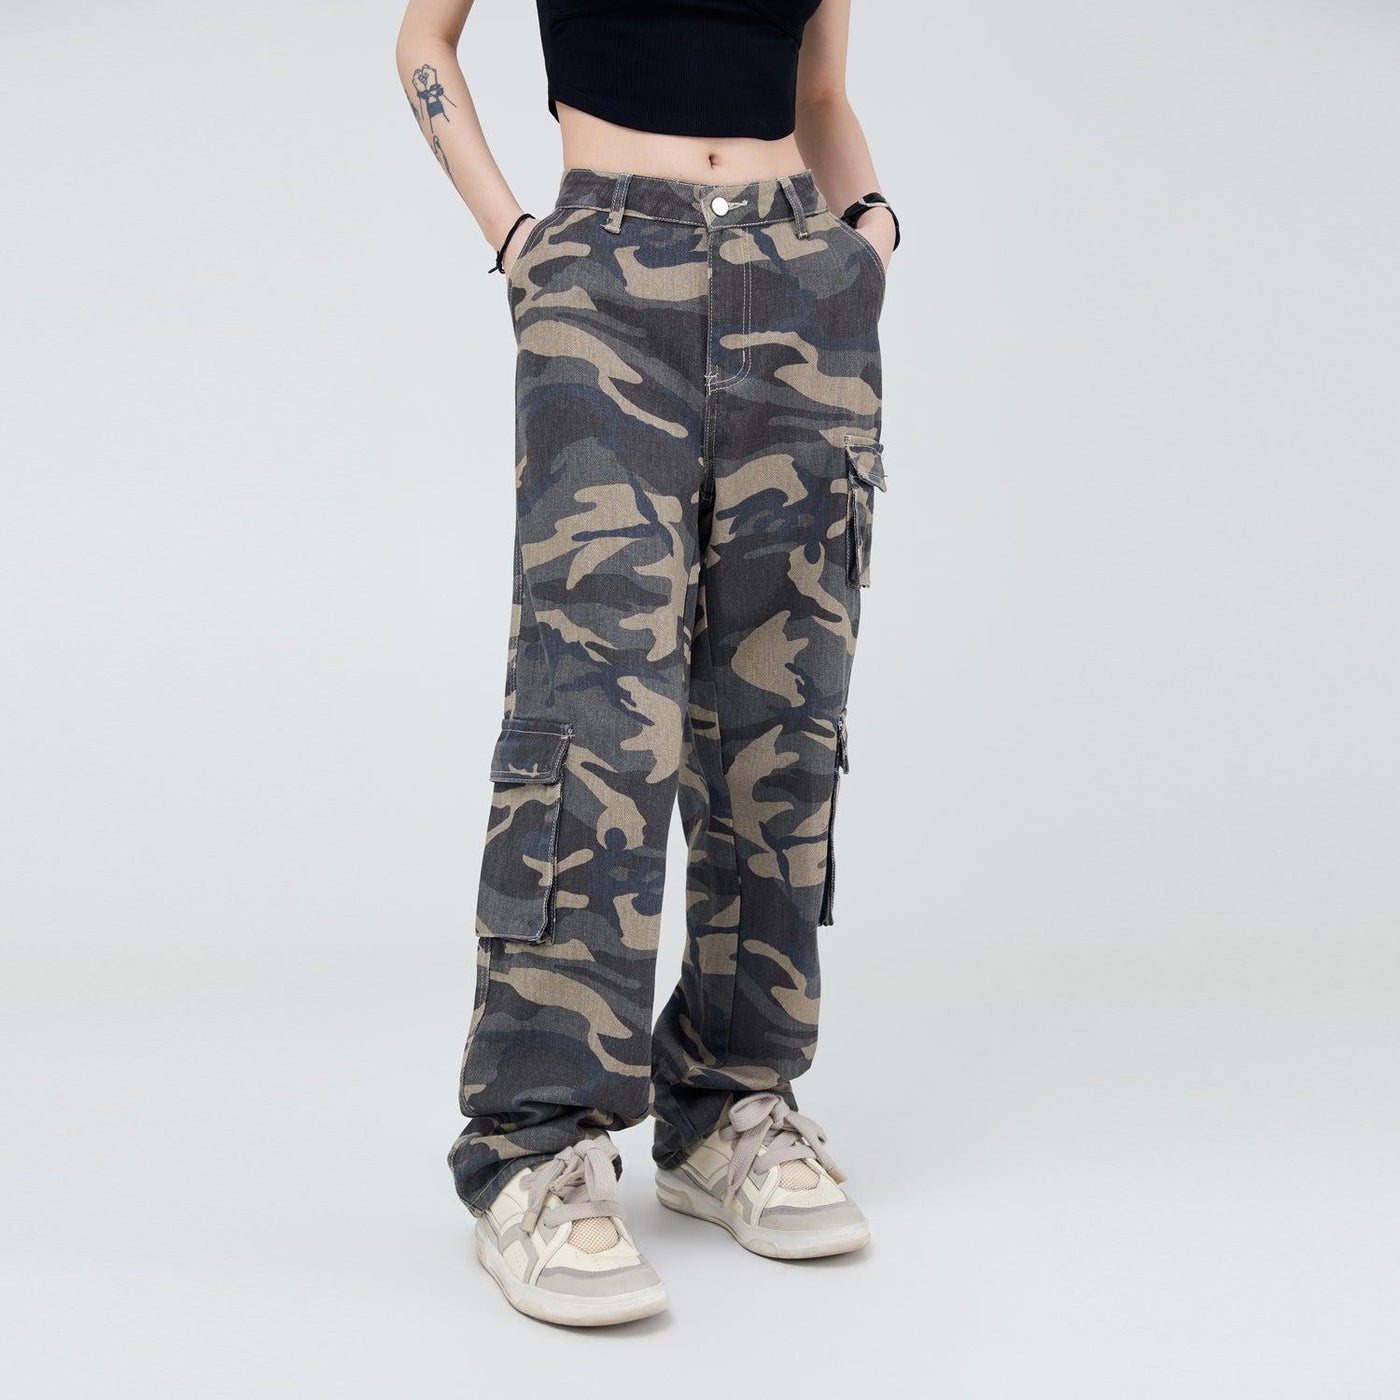 Flap Pocket Camouflage Cargo Pants Korean Street Fashion Pants By Made Extreme Shop Online at OH Vault